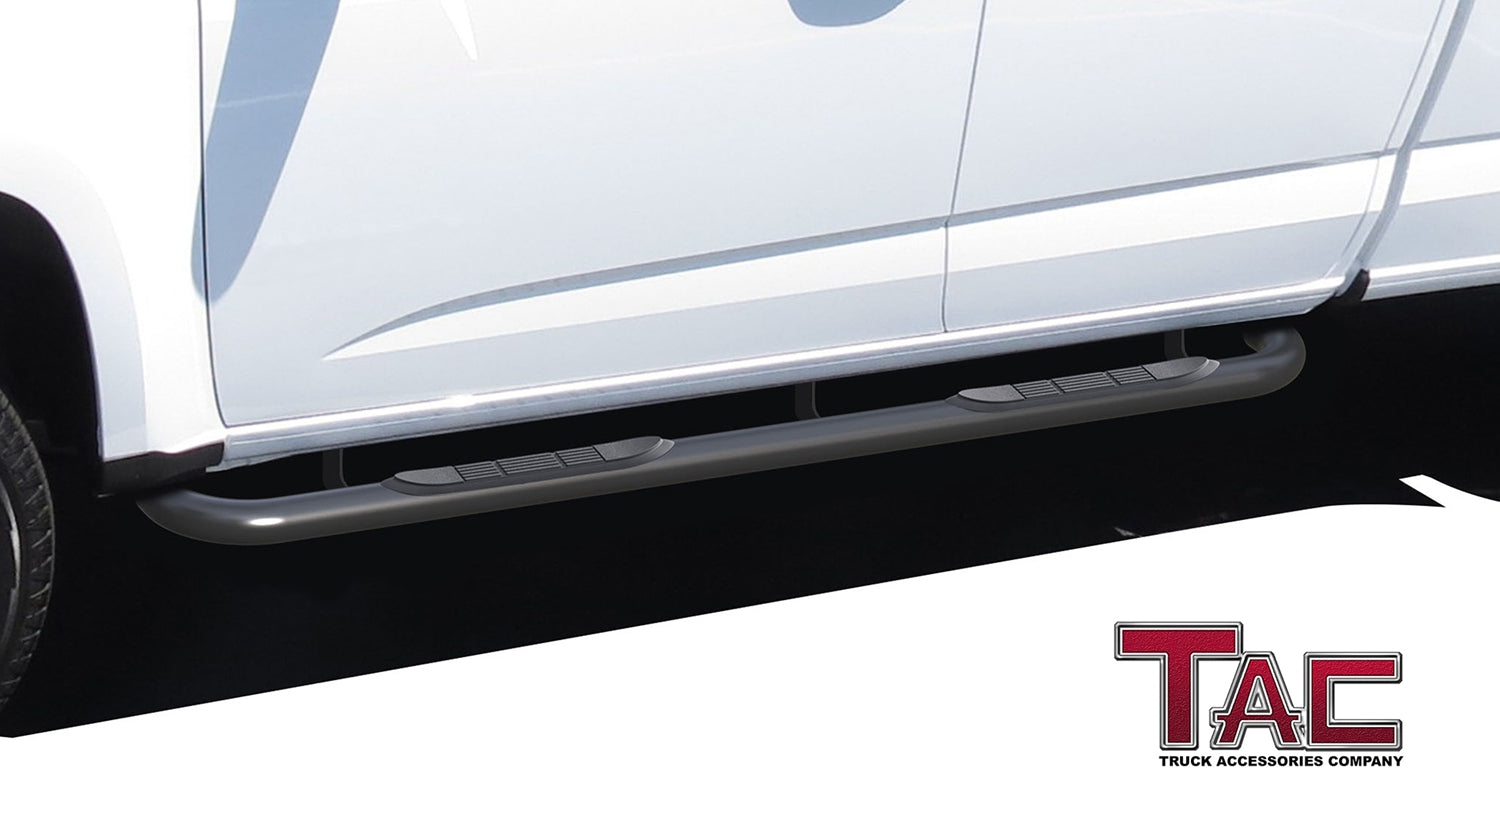 TAC Side Steps fit 2004-2012 Chevy Colorado Extended Cab/GMC Canyon Extended Cab Pickup Truck 3" Black Side Bars Nerf Bars Step Rails Running Boards Off Road Exterior Accessories 2 Pieces - 0